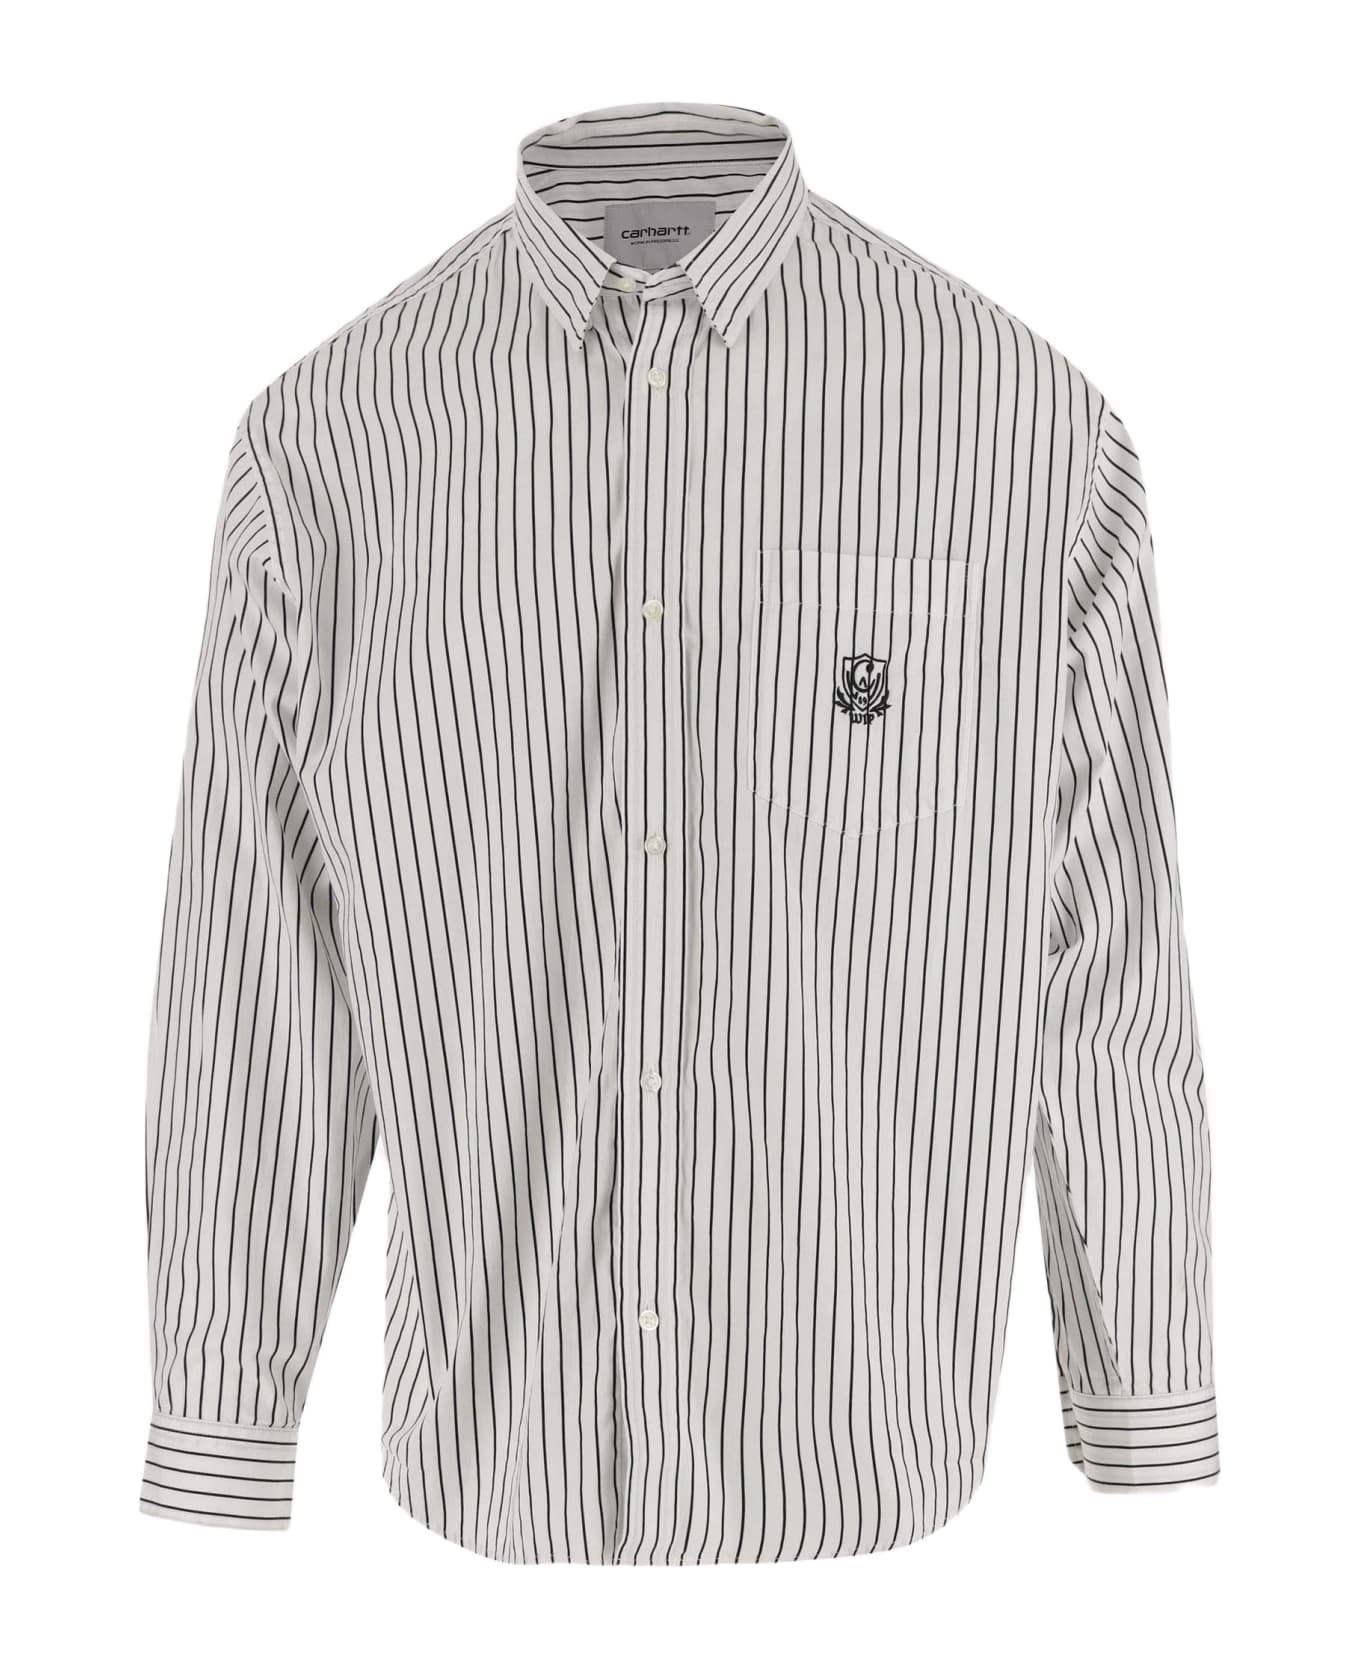 Carhartt Cotton Shirt With Striped Pattern - Red